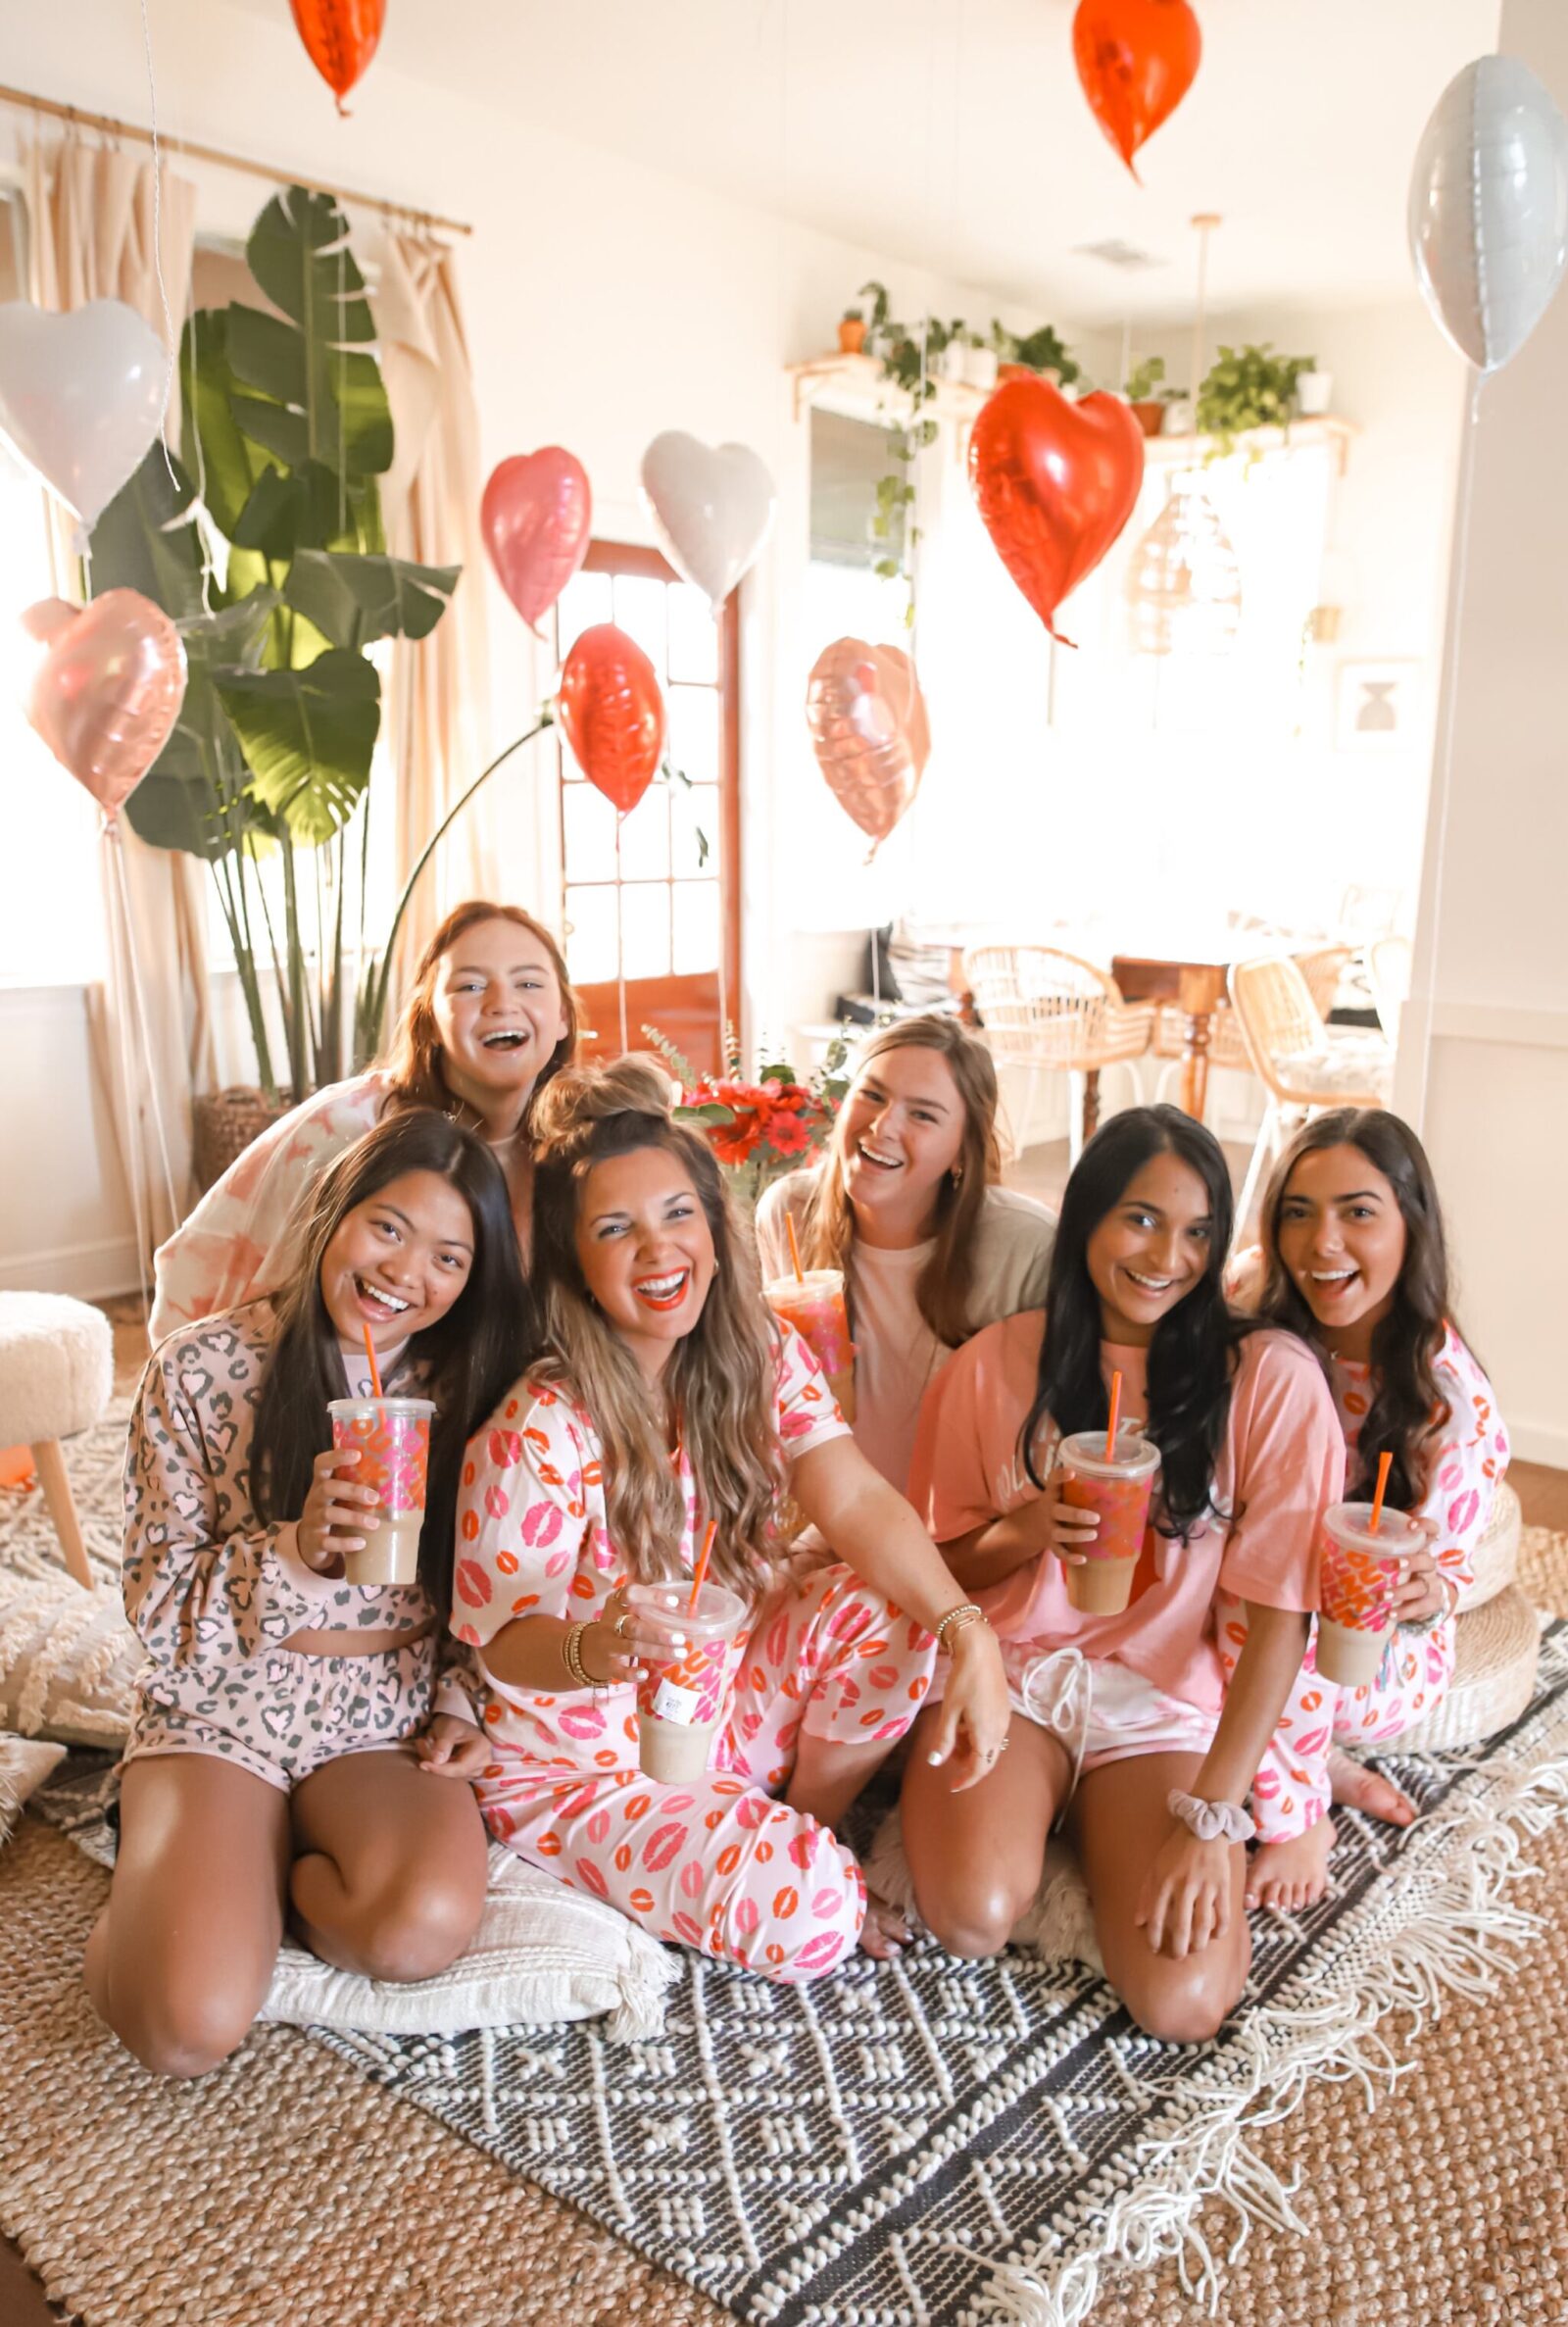 HOW TO THROW A GALENTINE'S DAY PARTY - Dashing Darlin'